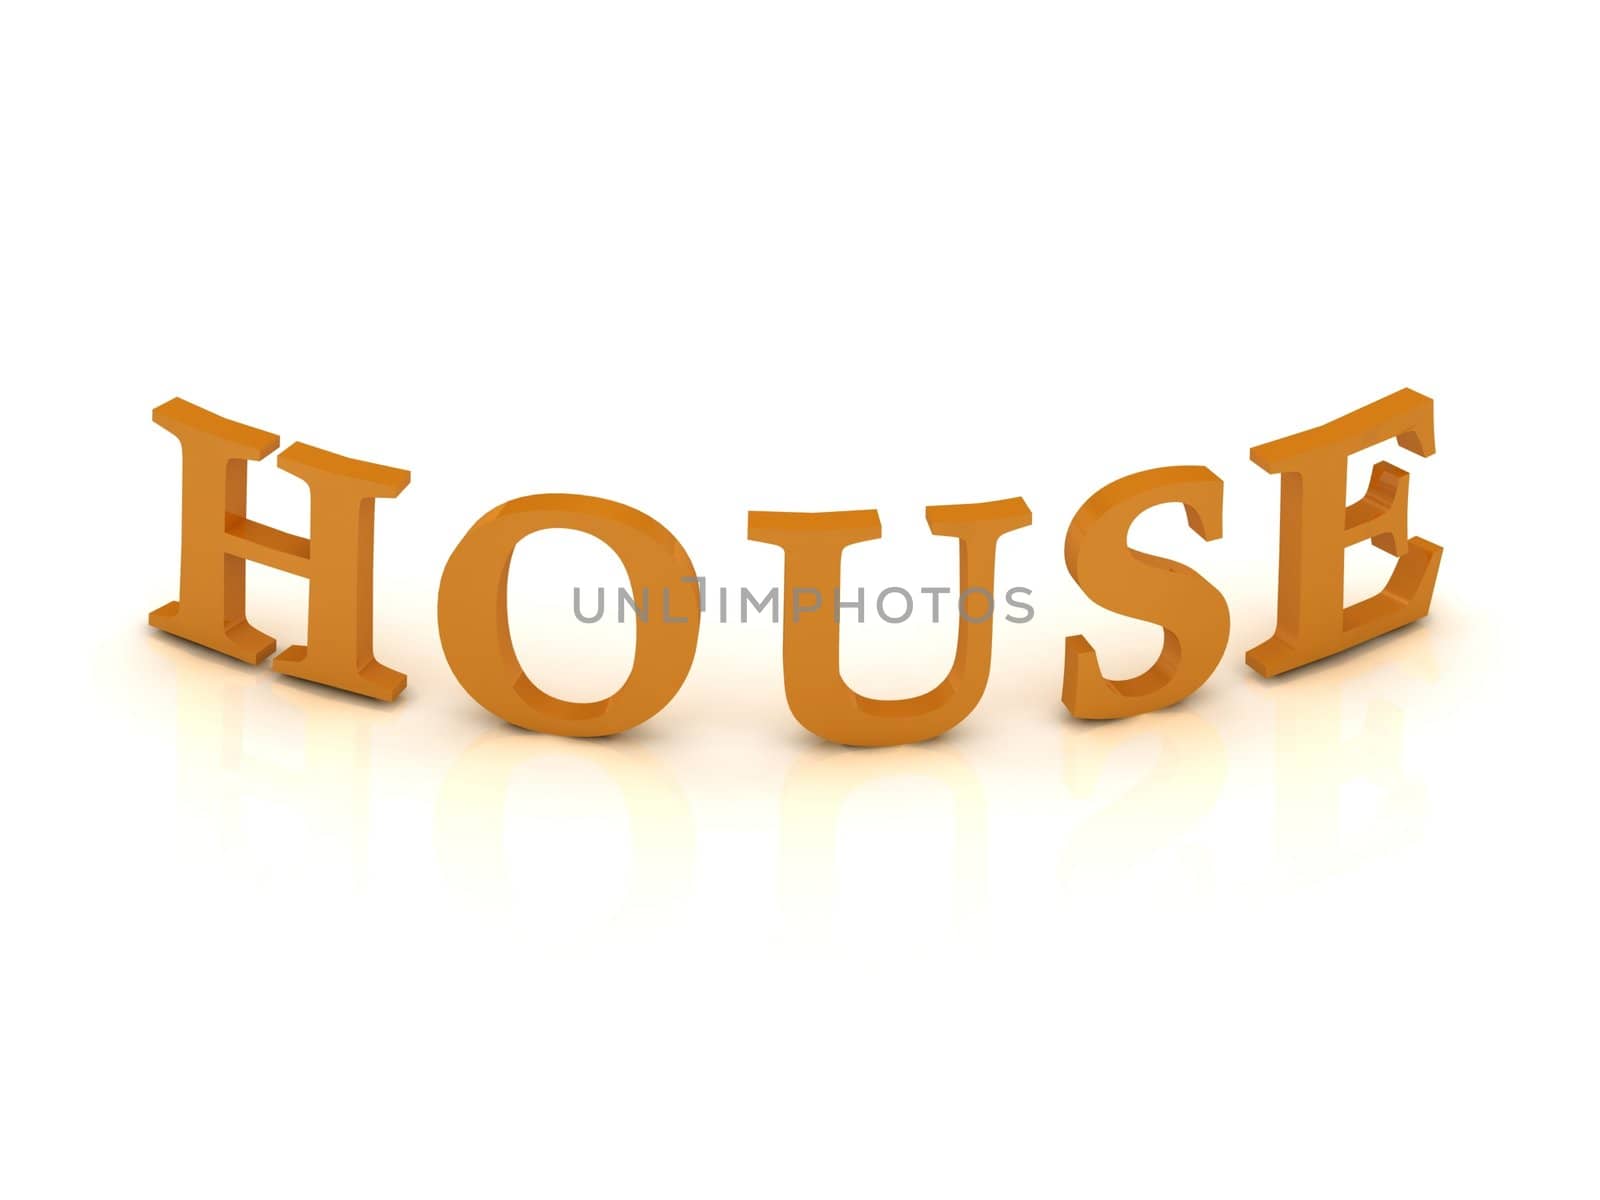 HOUSE sign with orange letters on isolated white background